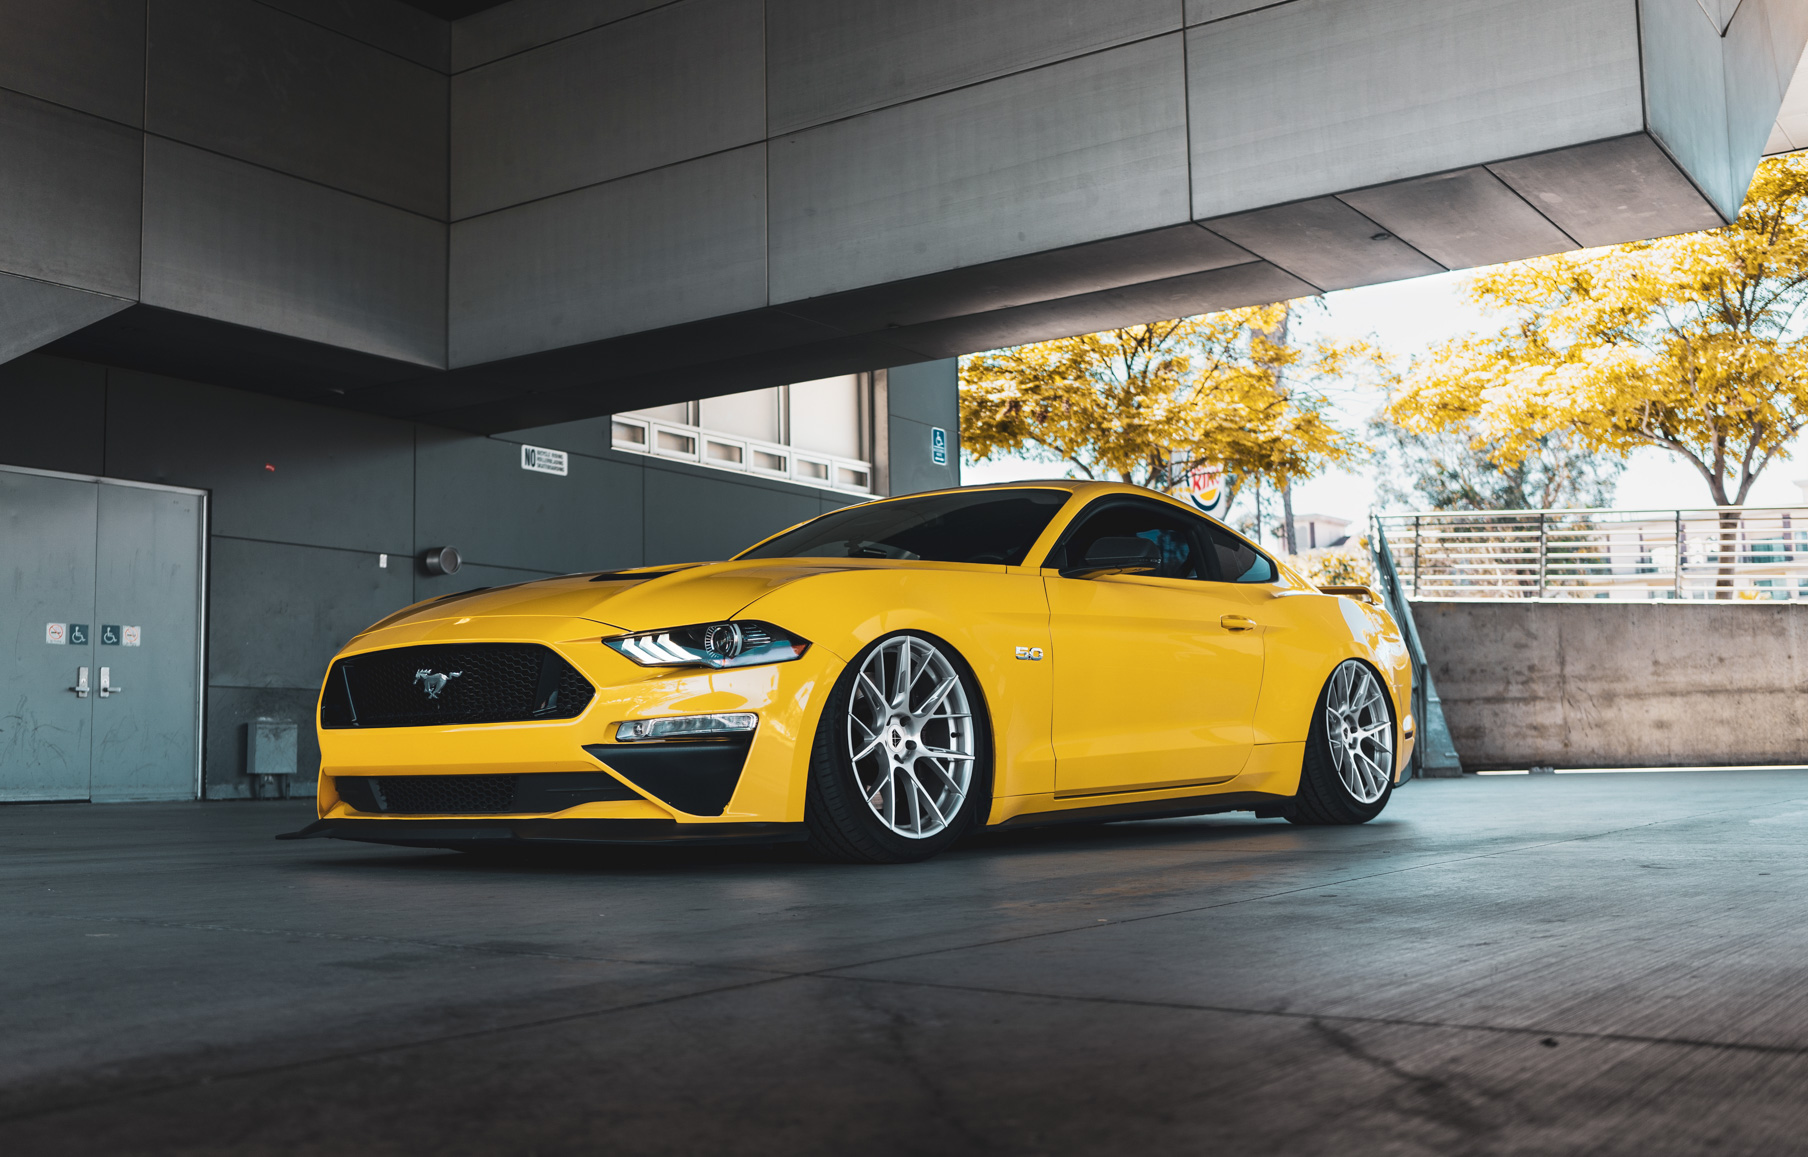 S650 Mustang Authorized Blaque Diamond Wheels Dealer: BD-F12 F18 F25 F29 Flow Forged Series wheels for Mustang S650 2018_Ford_Mustang_GT_Blaque_Diamond_Wheels_BDF18_20_inch_Brushed_Silver-13-1